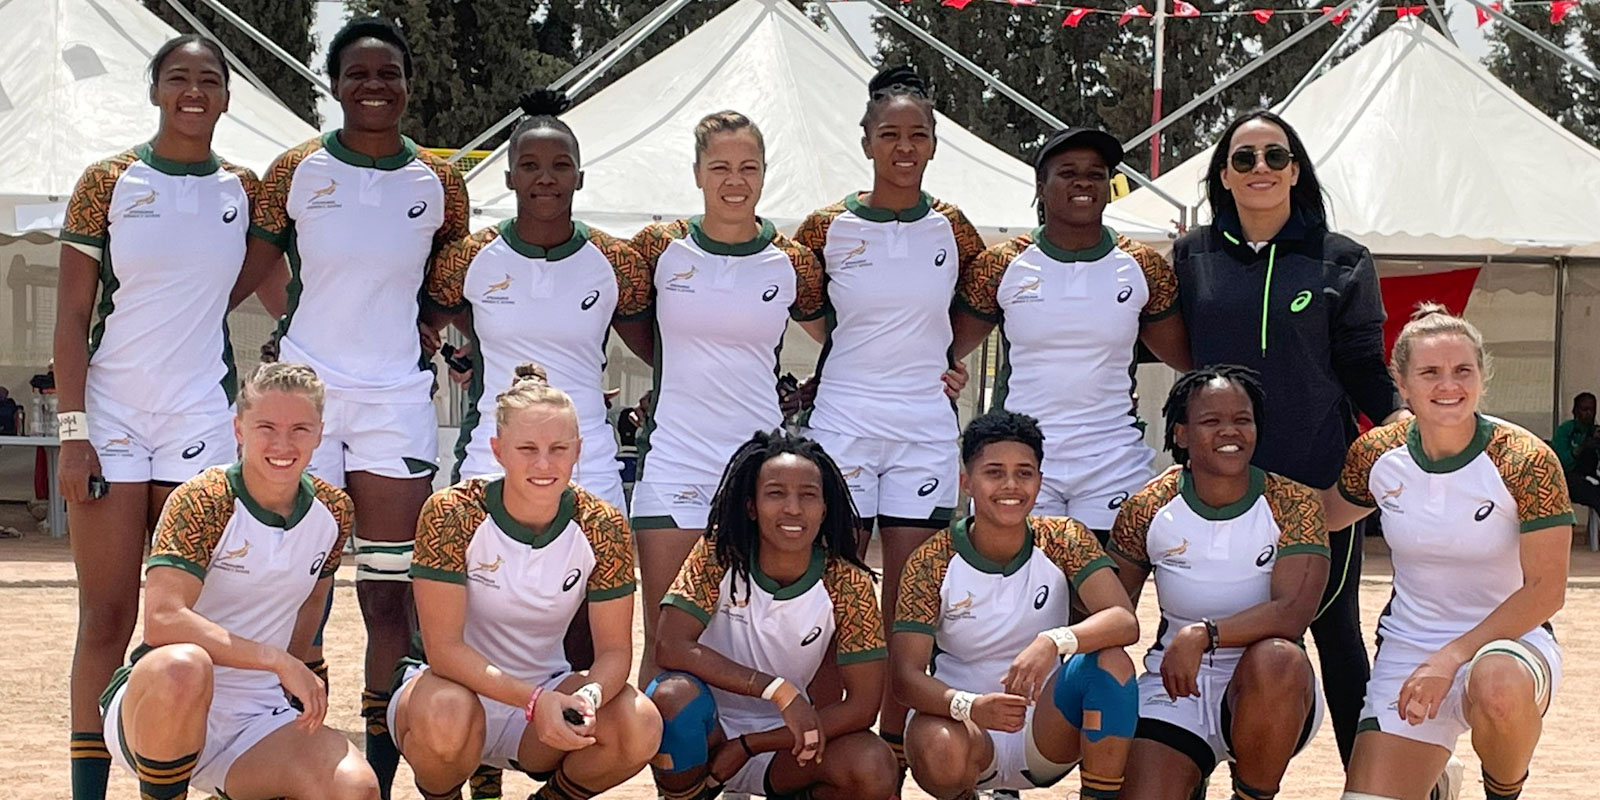 The Springbok Women's Sevens team at the Rugby Africa Women's Sevens Cup in Tunisia.